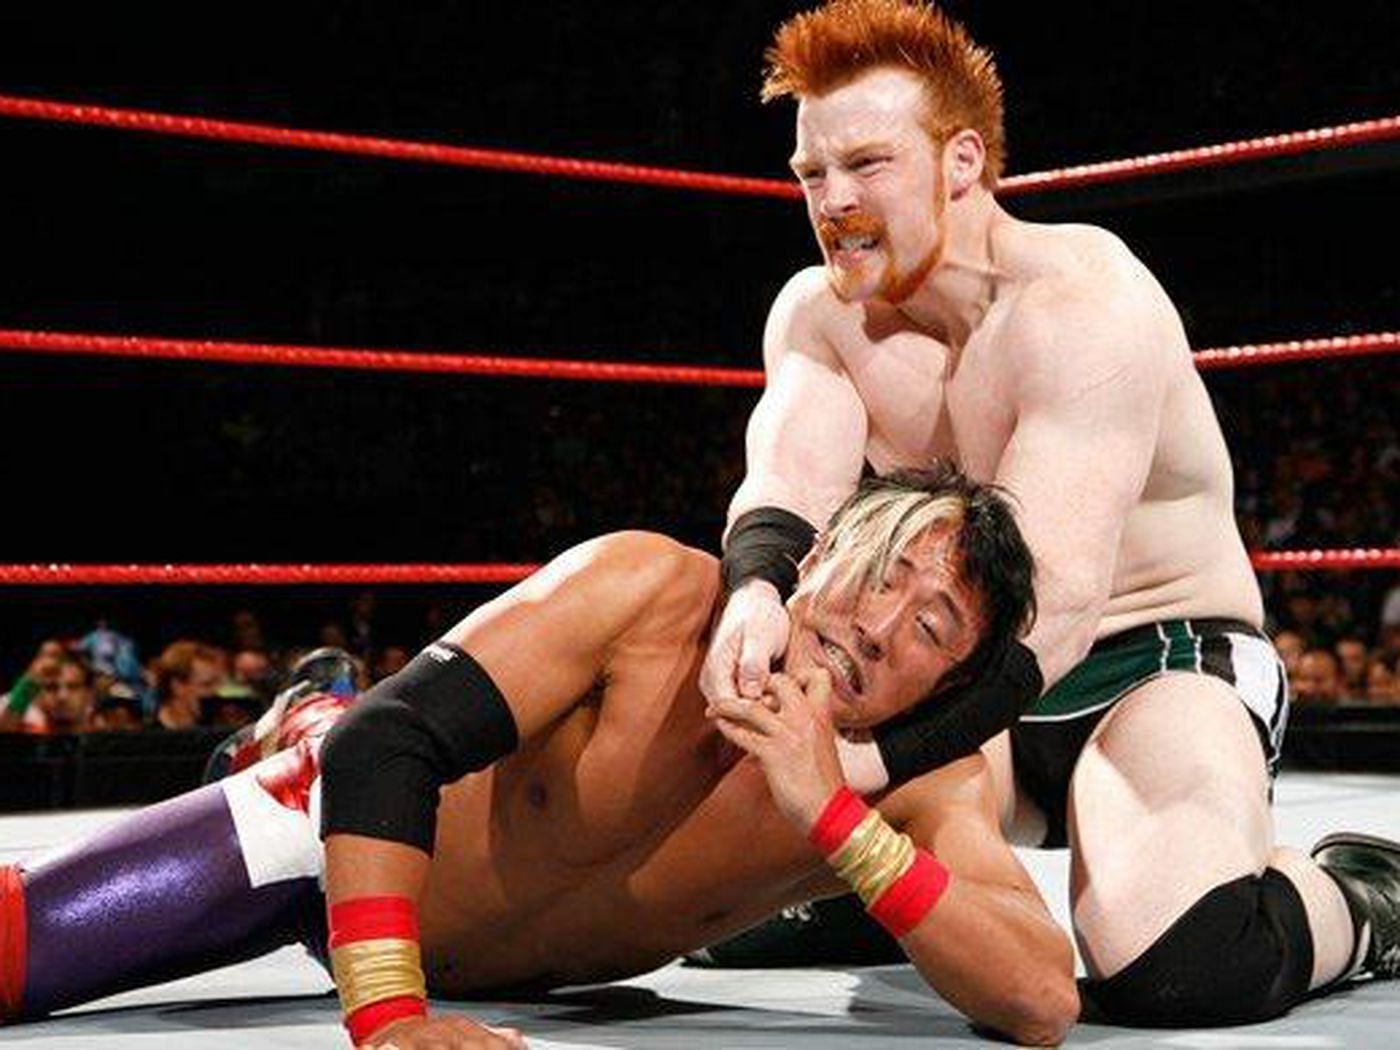 Sheamus and Tatsu had some in-ring matches in WWE